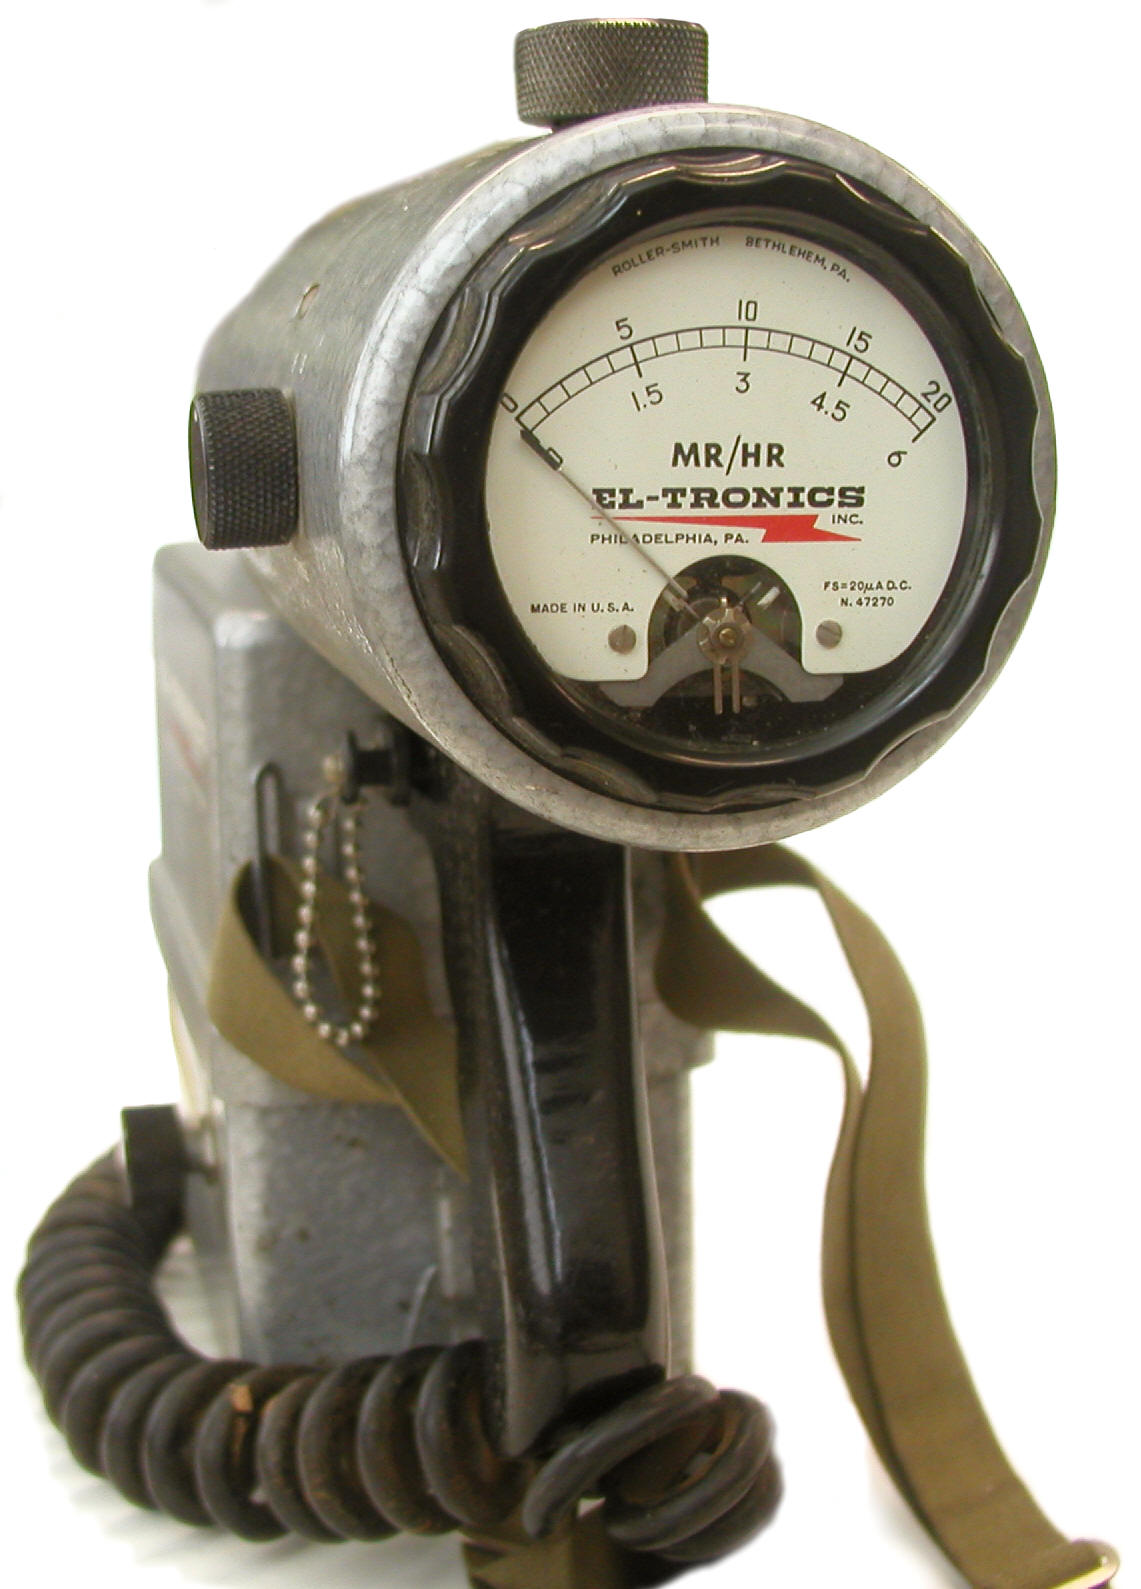 El-Tronics PR-31 Scintillation Counter (mid to late 1950s)